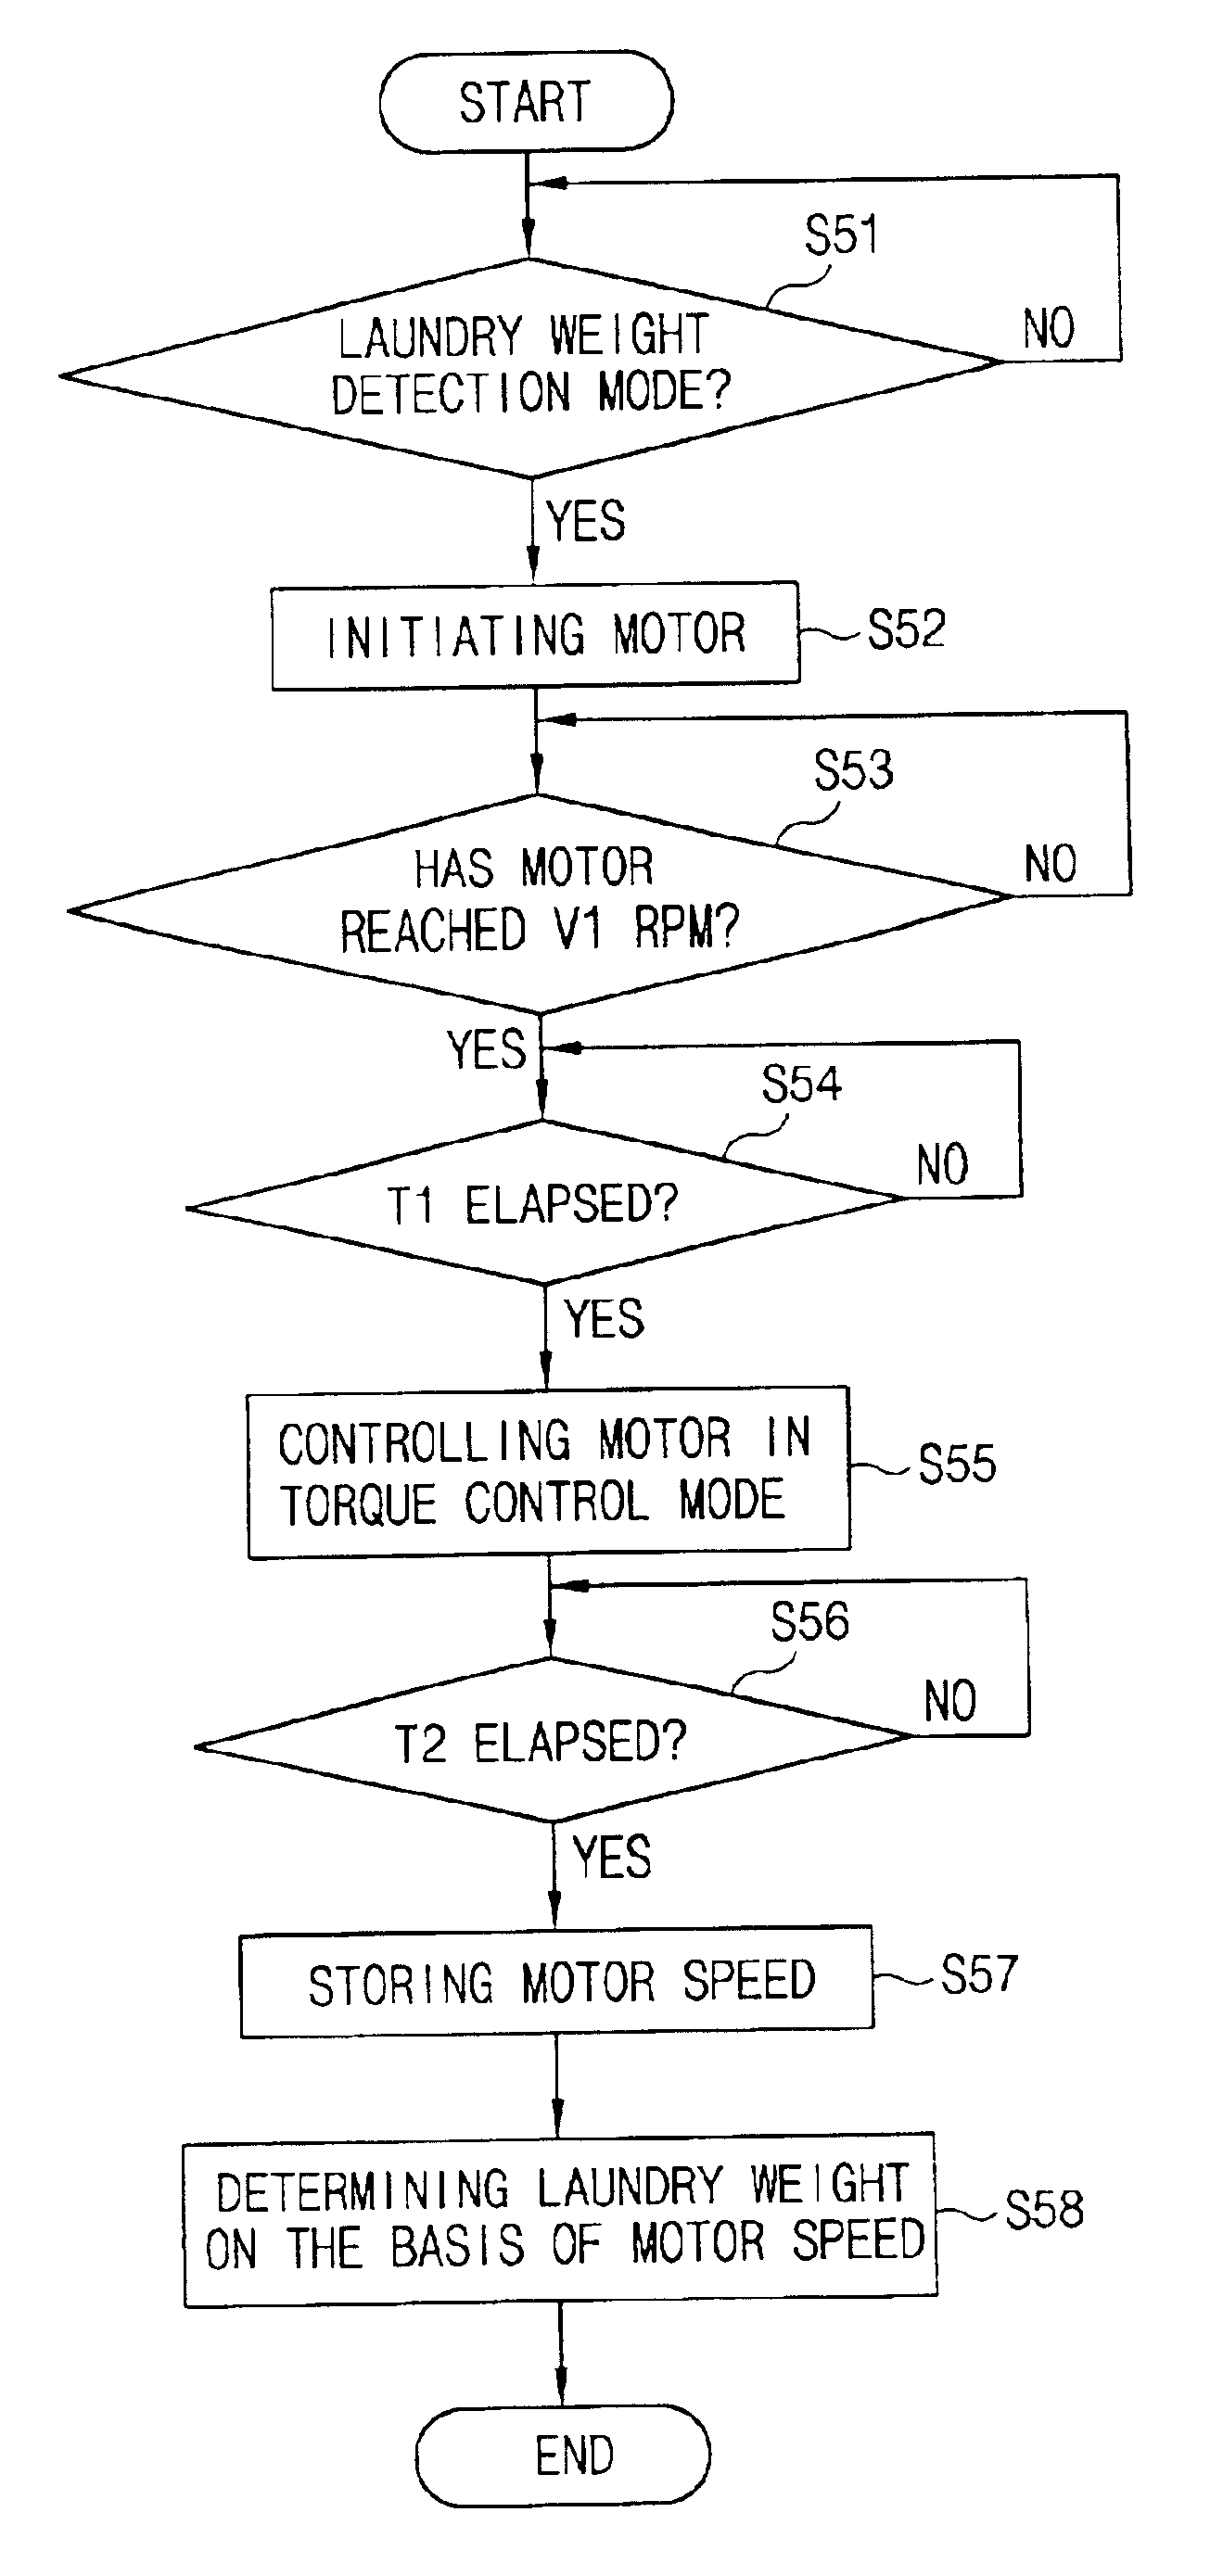 Apparatus and method for detecting laundry weight in washing machine employing sensorless BLDC motor